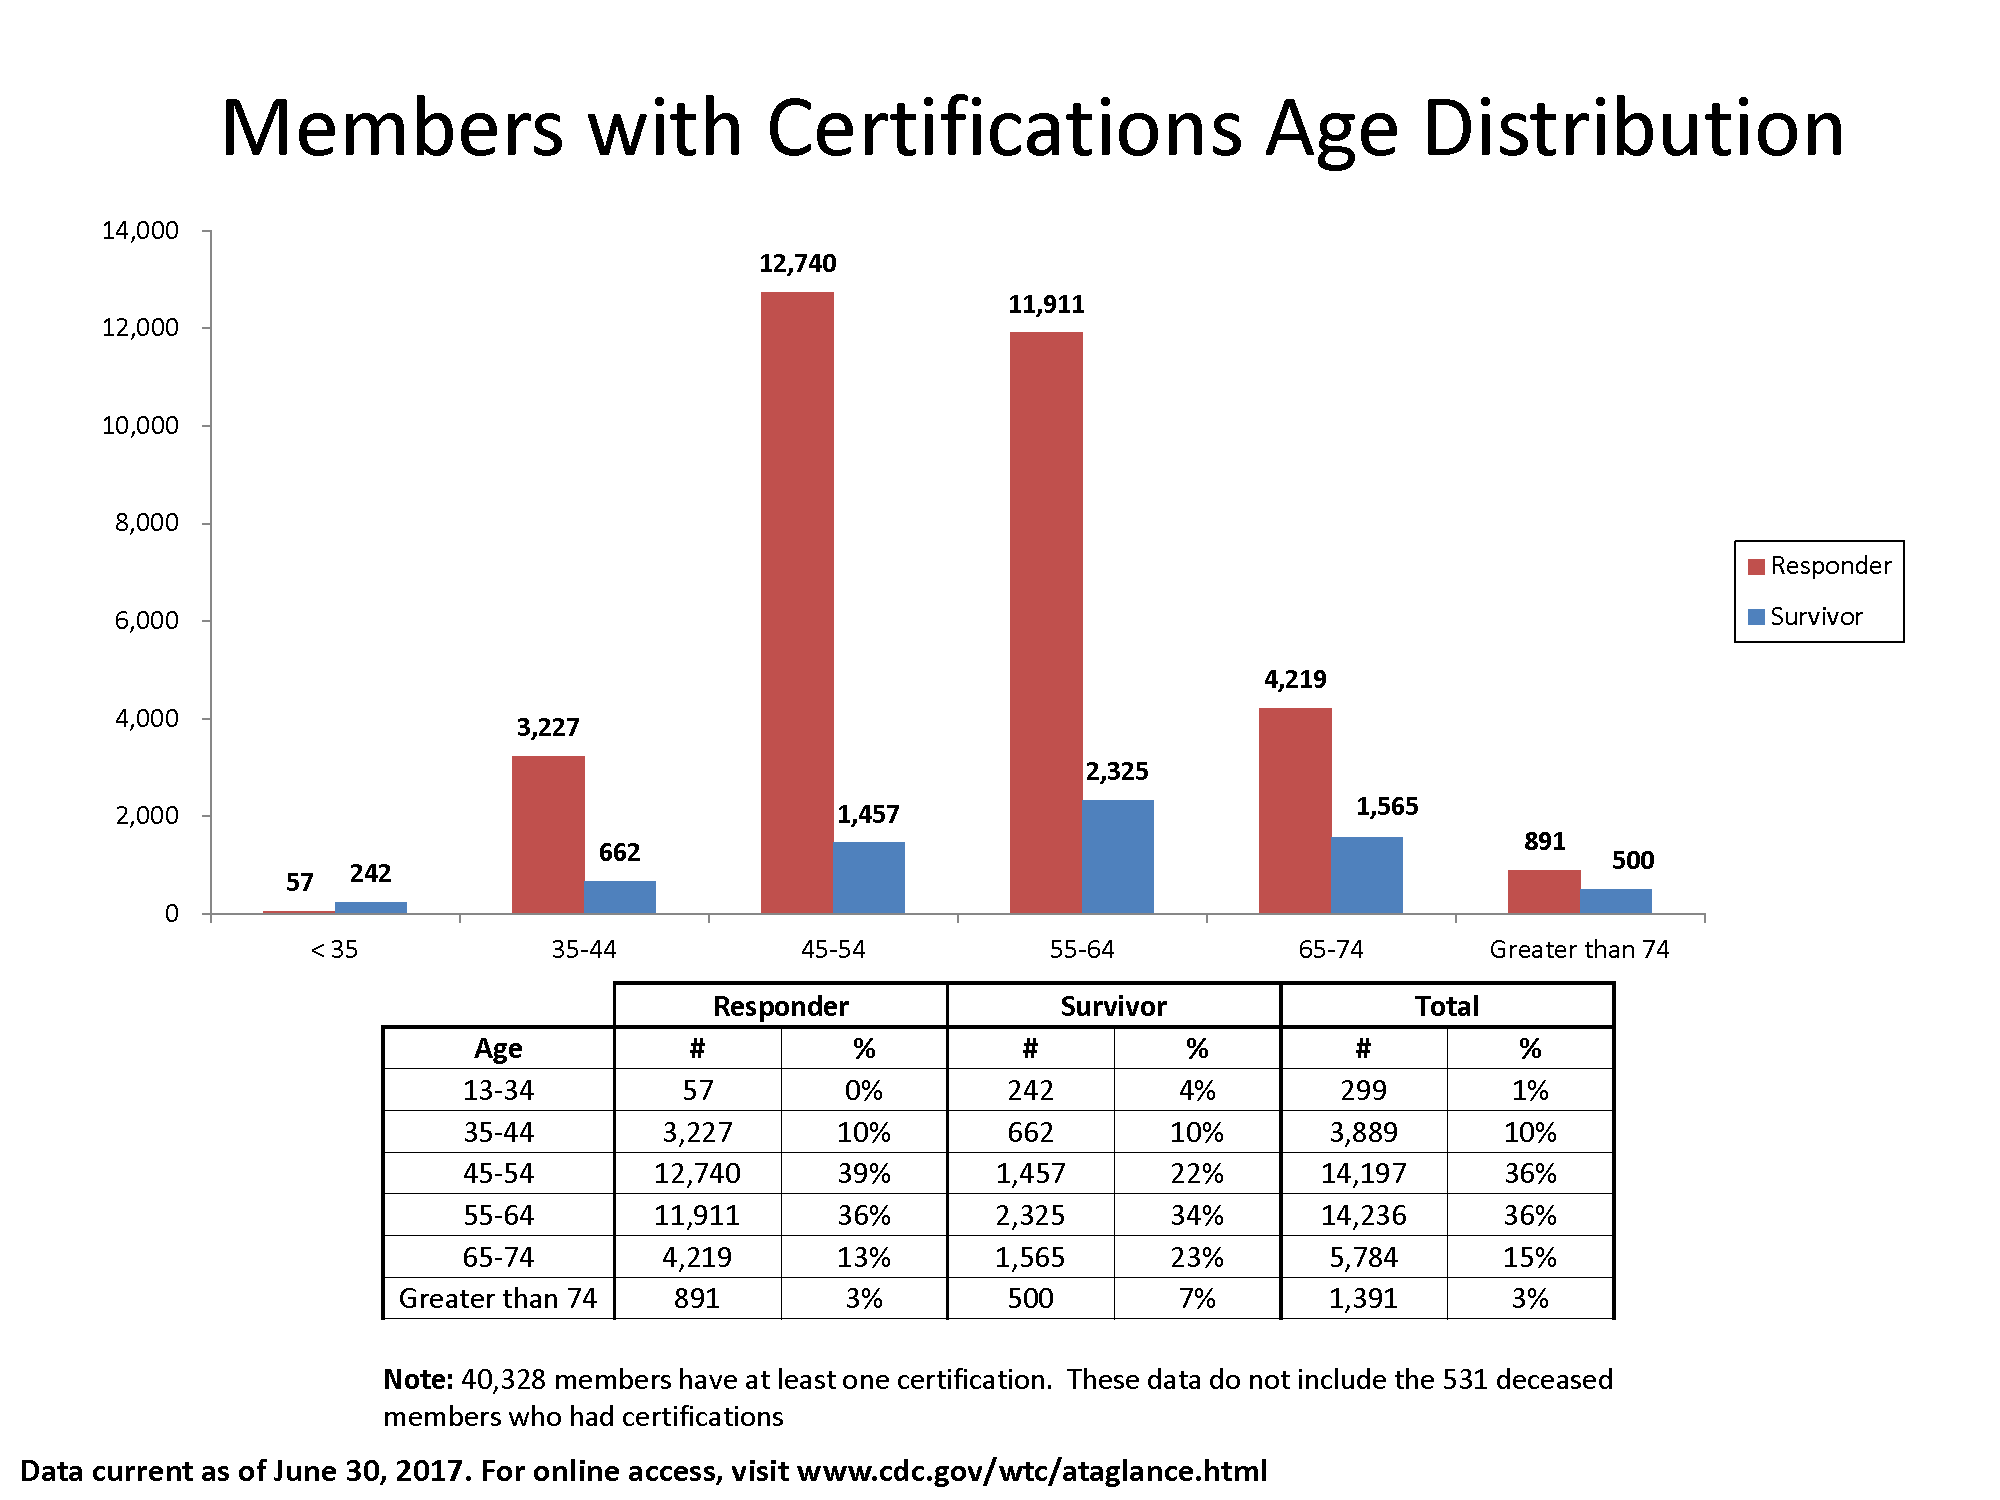 Bar chart of data in the table showing the number of members with certifications by Responder and Survivor and age bracket.